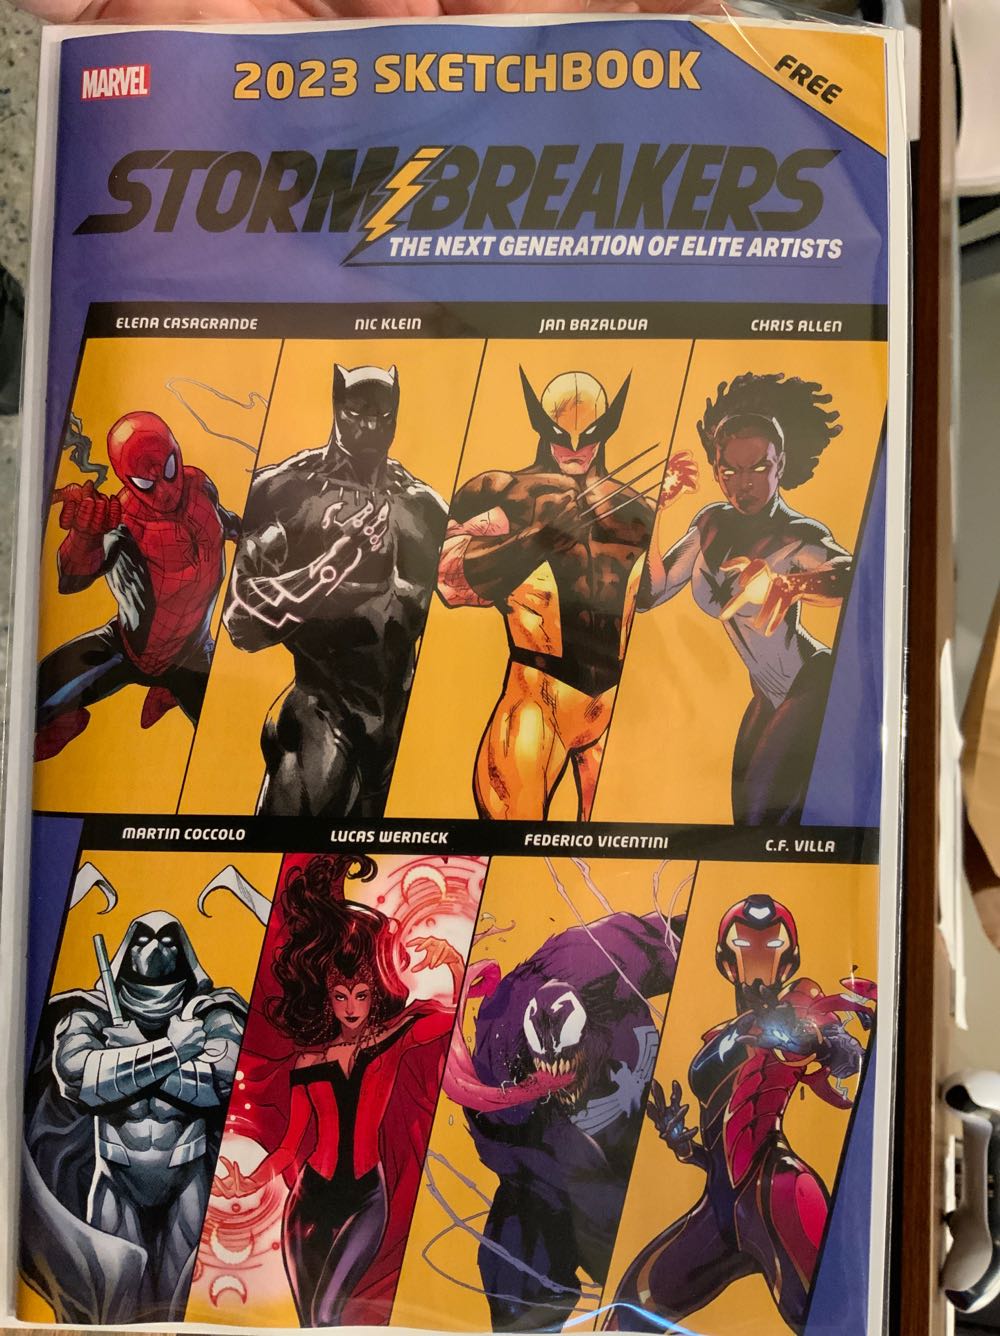 StormBreakers Sketchbook (2023) - Marvel (1 - Apr 2023) comic book collectible [Barcode 15960628479314611] - Main Image 1